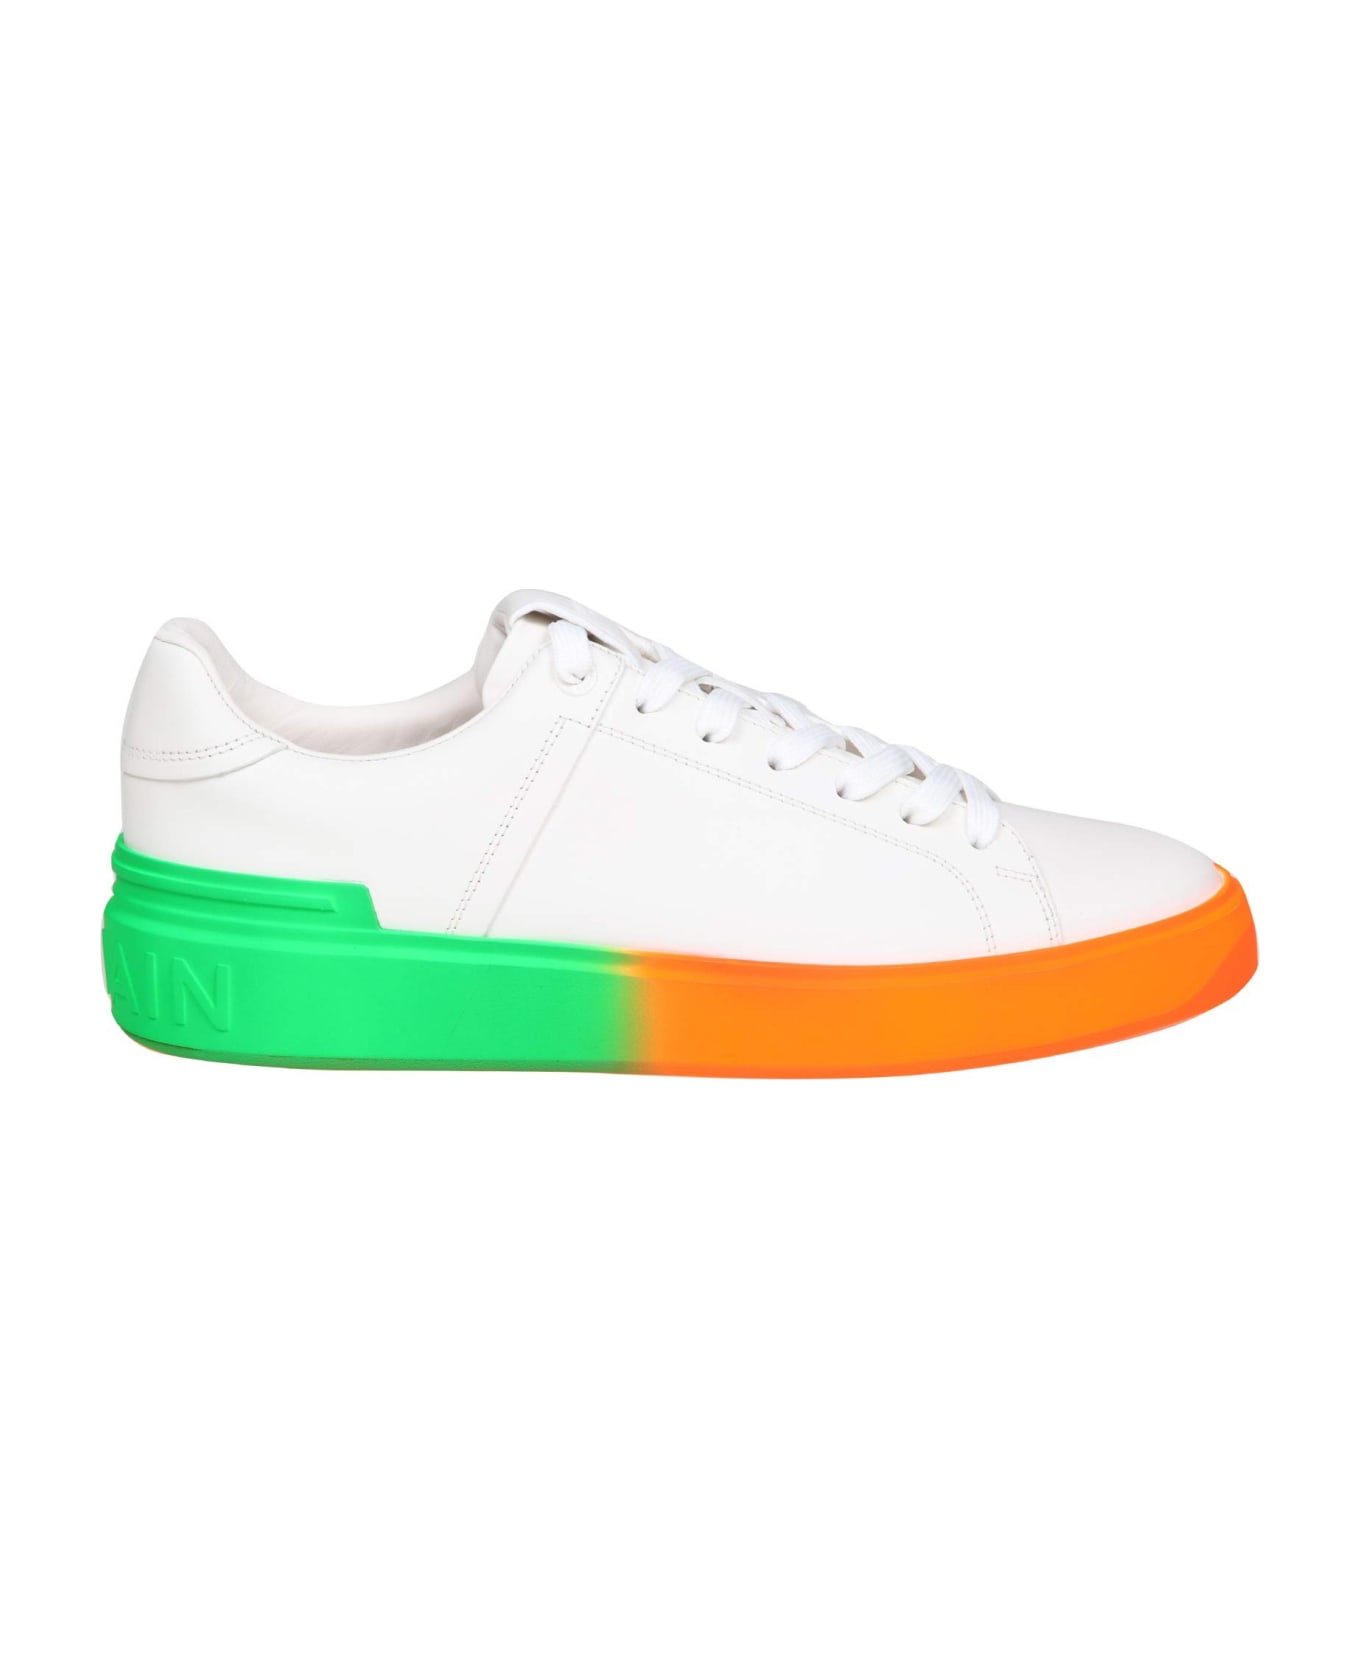 Balmain B Court Sneakers In White Leather With Two-tone Sole - white/multicolor